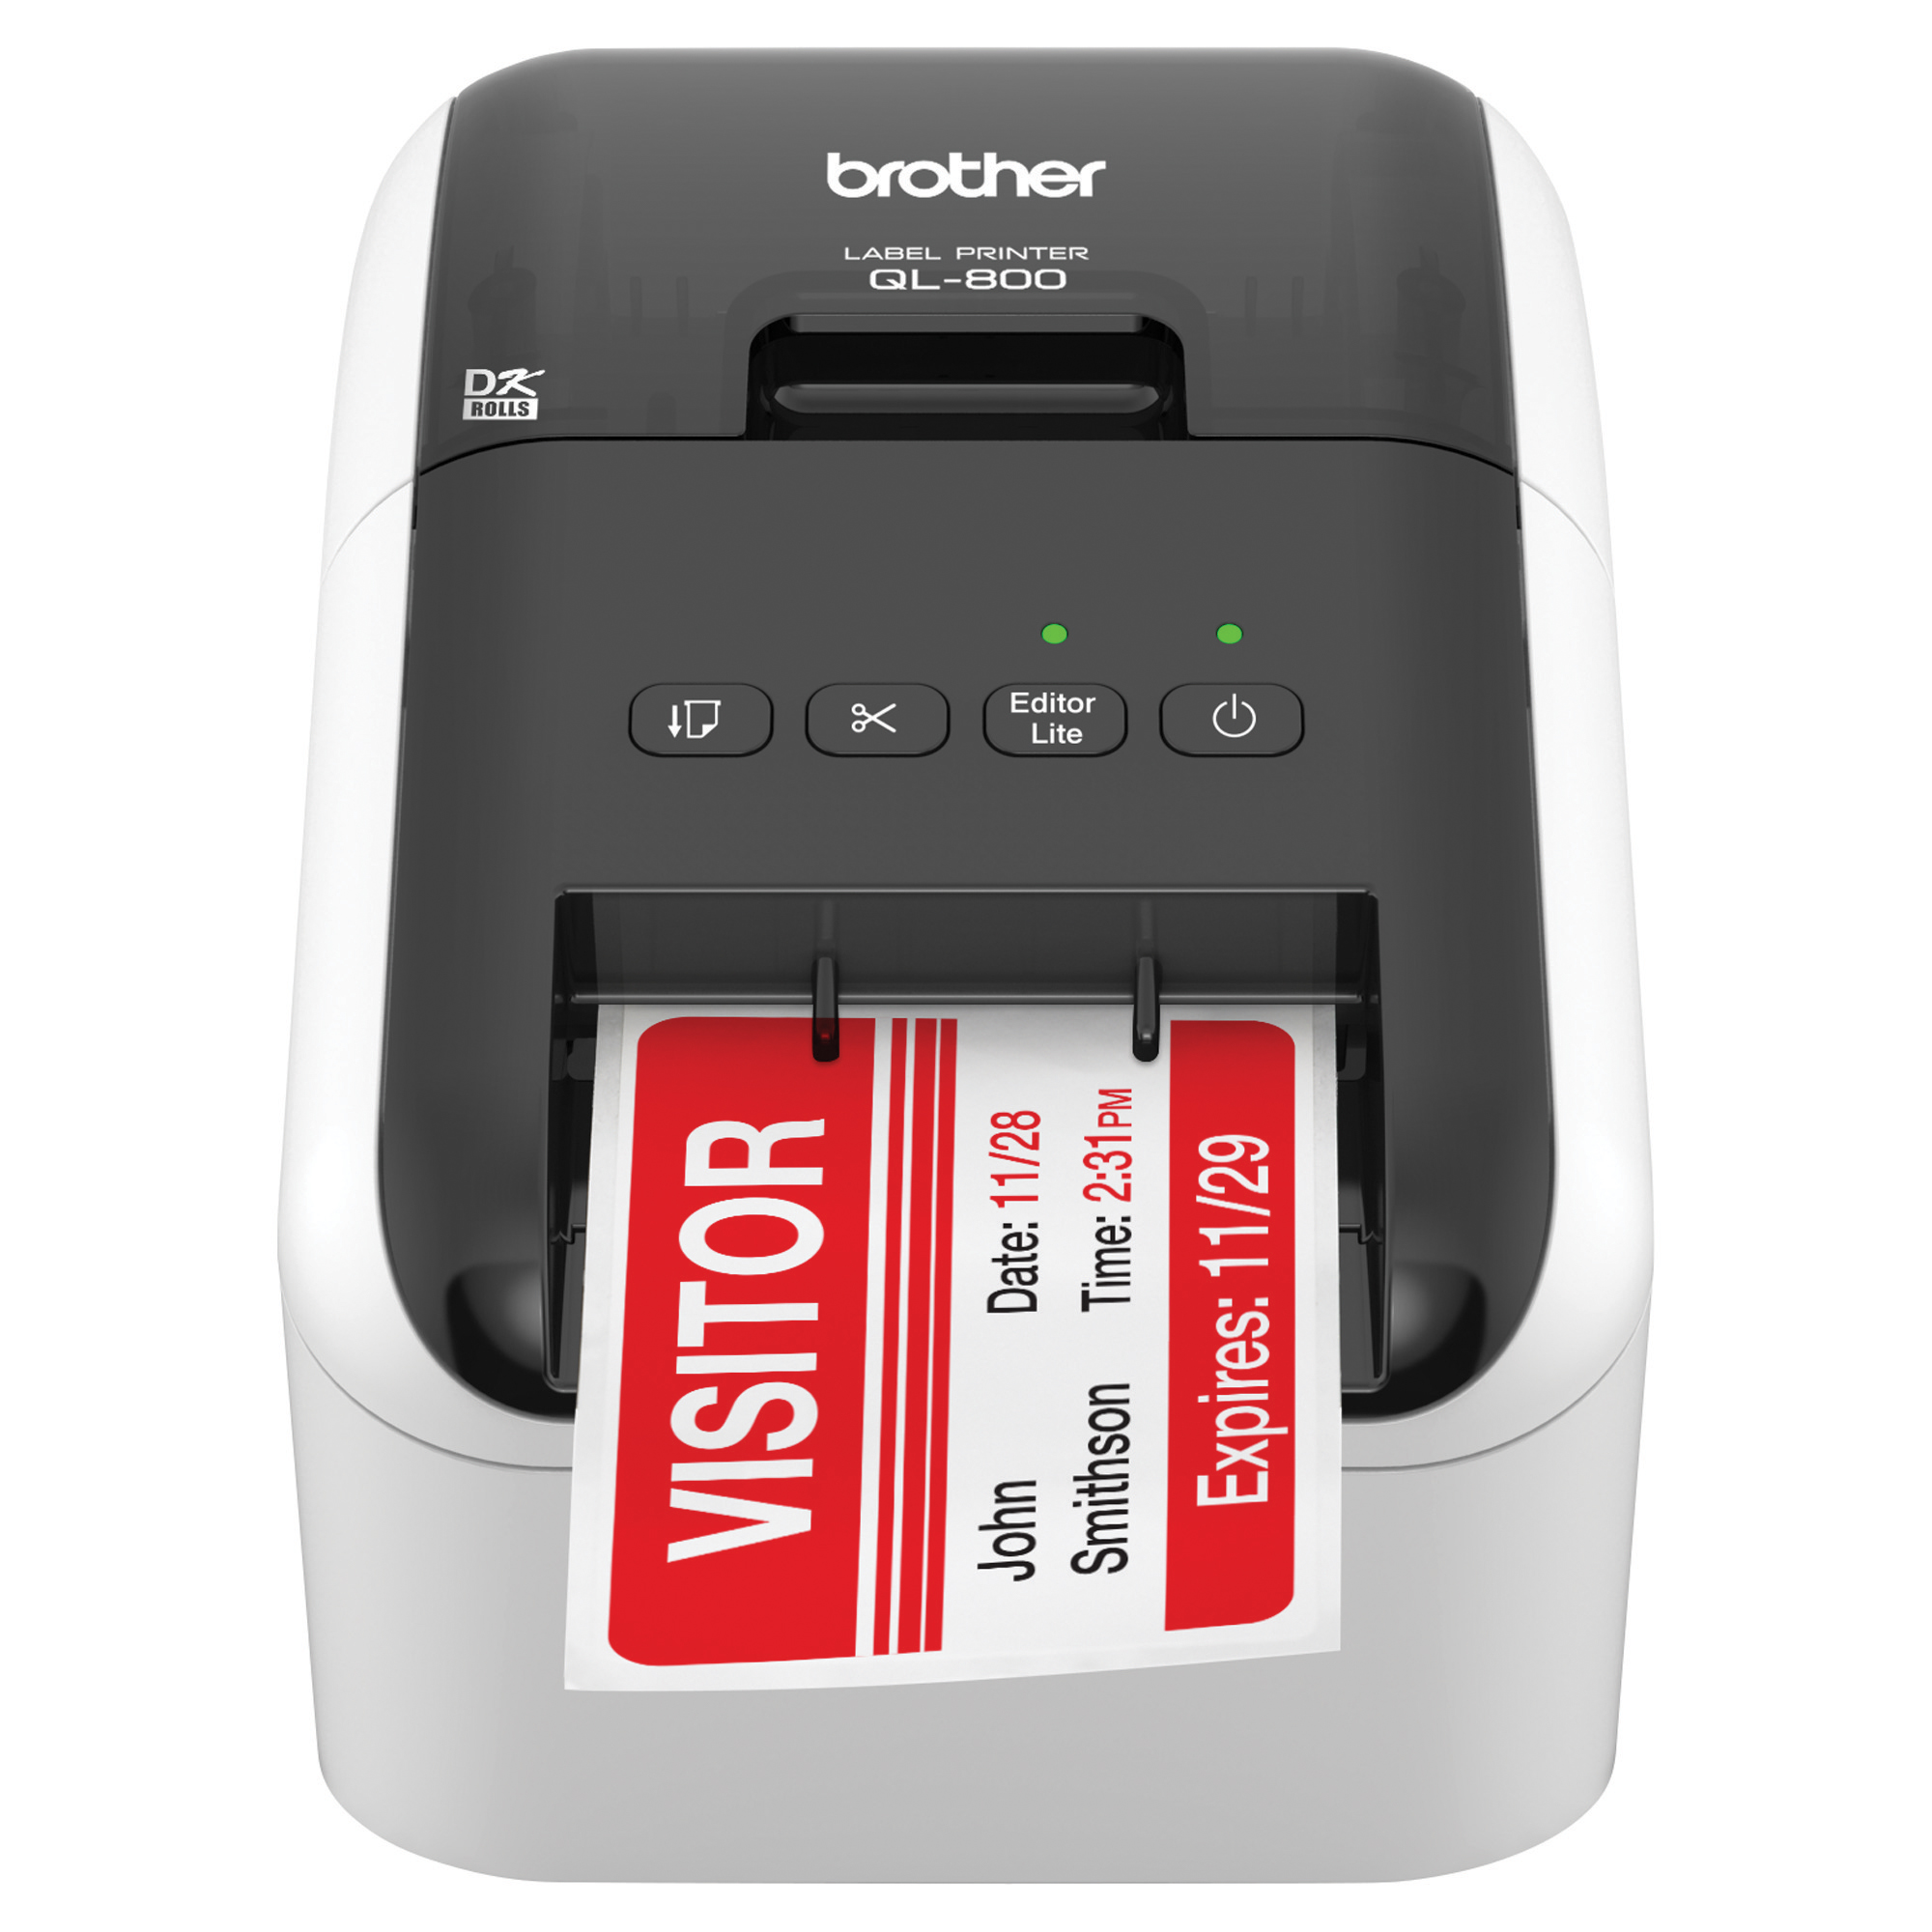 Brother QL-800 High-Speed Professional Label Printer, Black & Red Printing - image 1 of 9